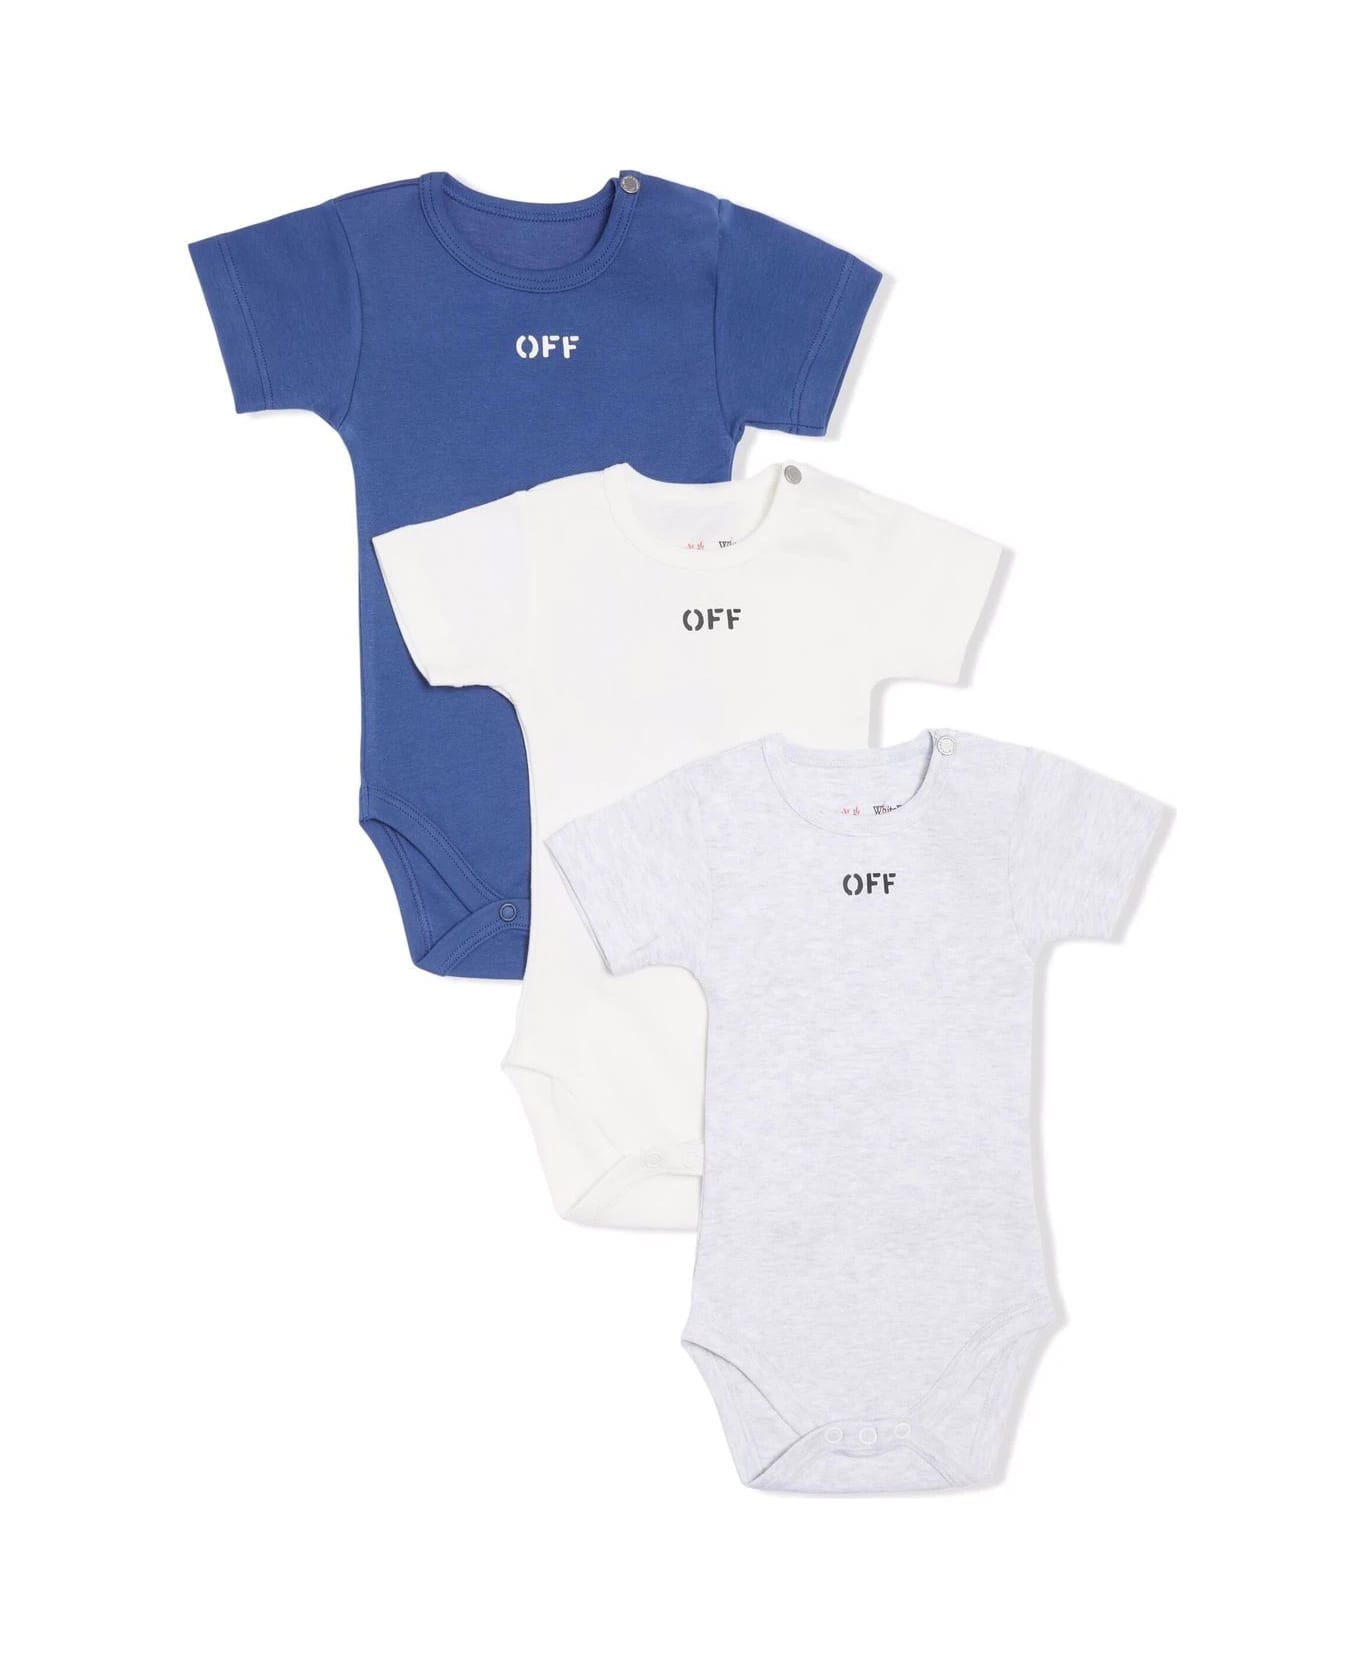 Off-White Set Of 3 Short Sleeve Baby Body In Blue, White And Grey - Multicolor